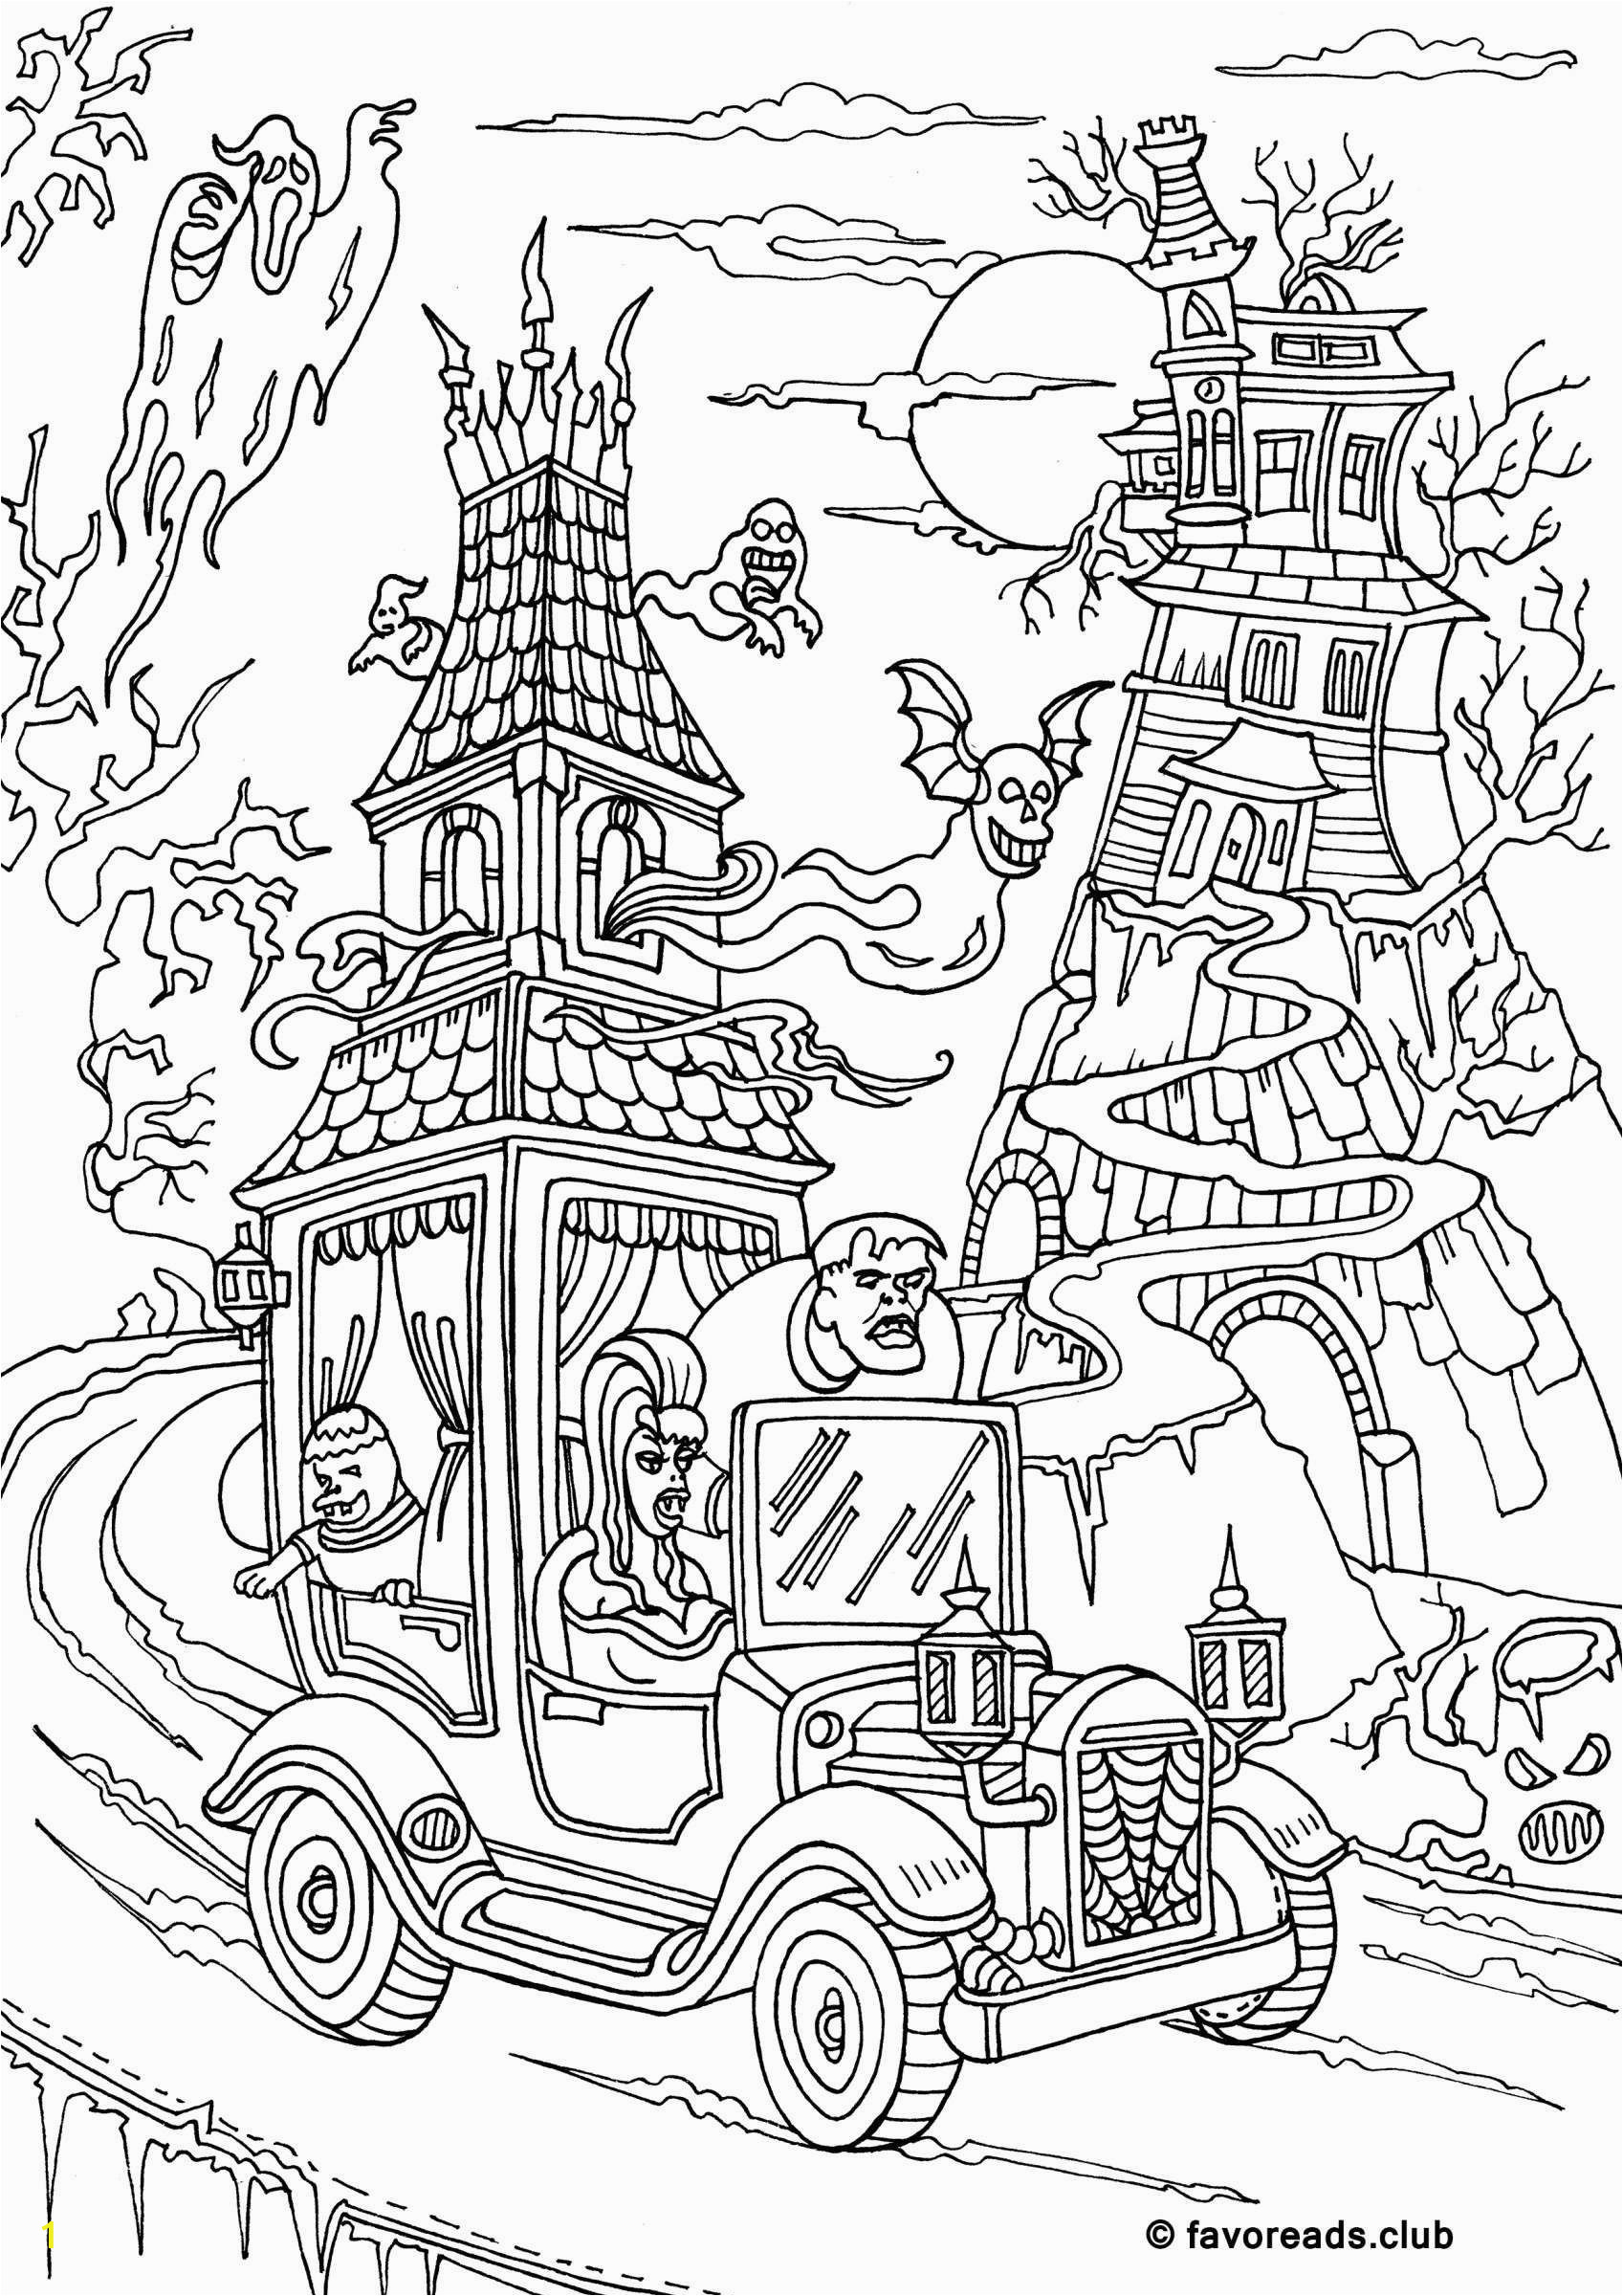 Free Printable Full Size Halloween Coloring Pages the Best Free Adult Coloring Book Pages